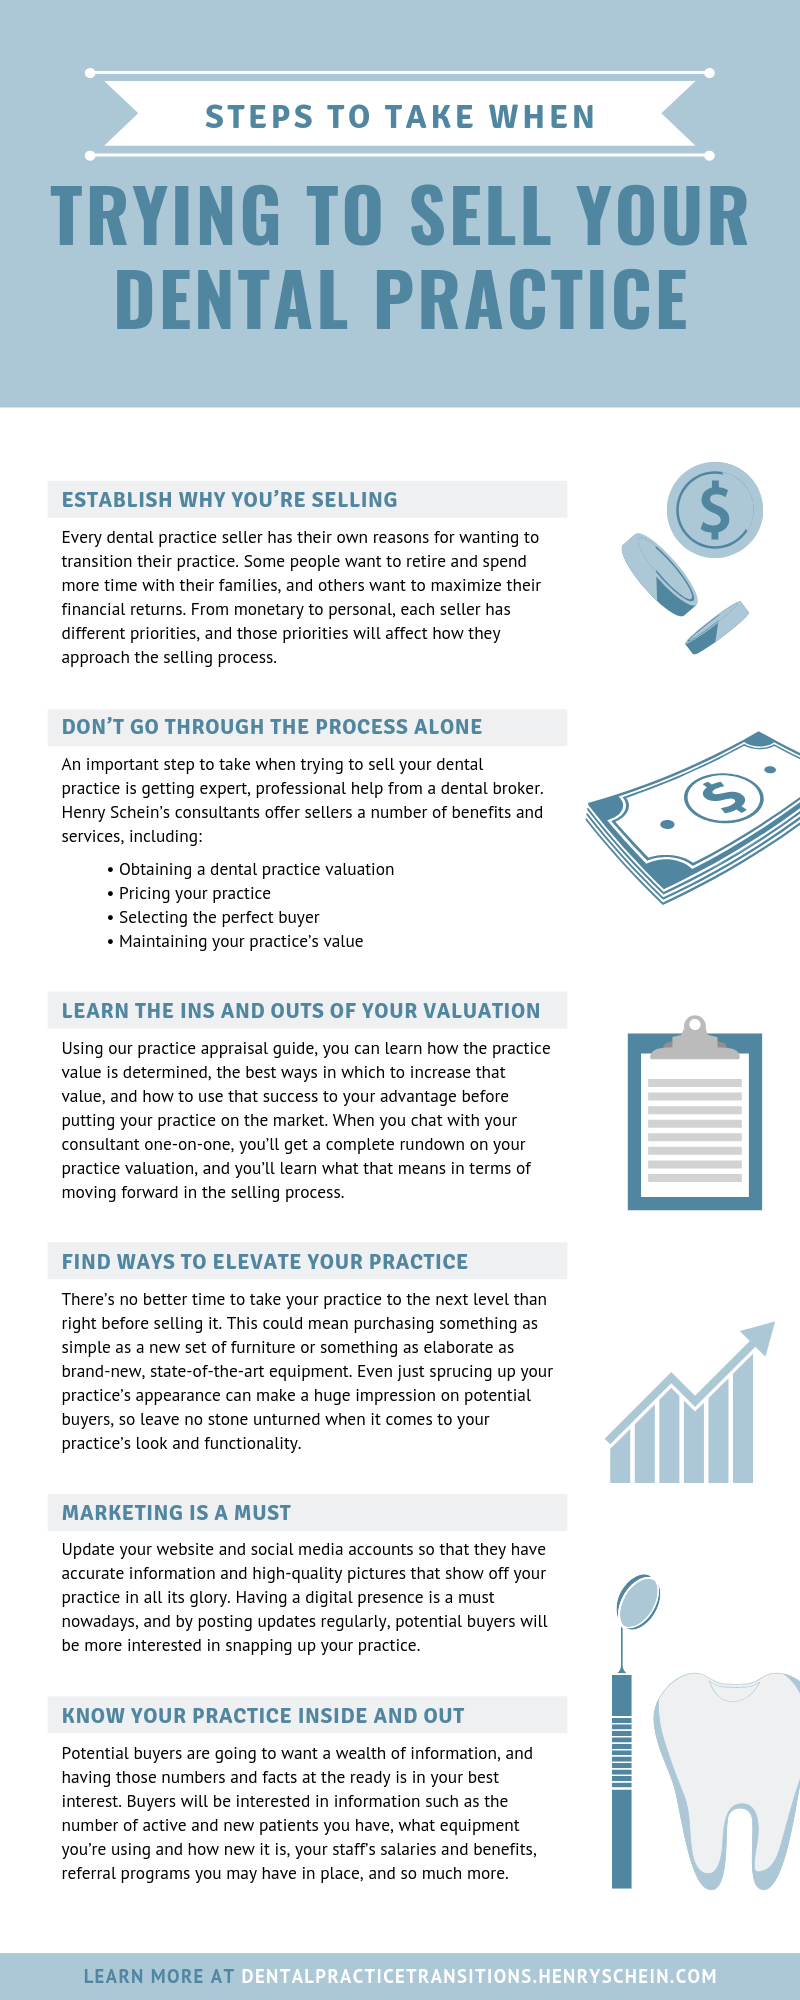 sell Your Dental Practice tips